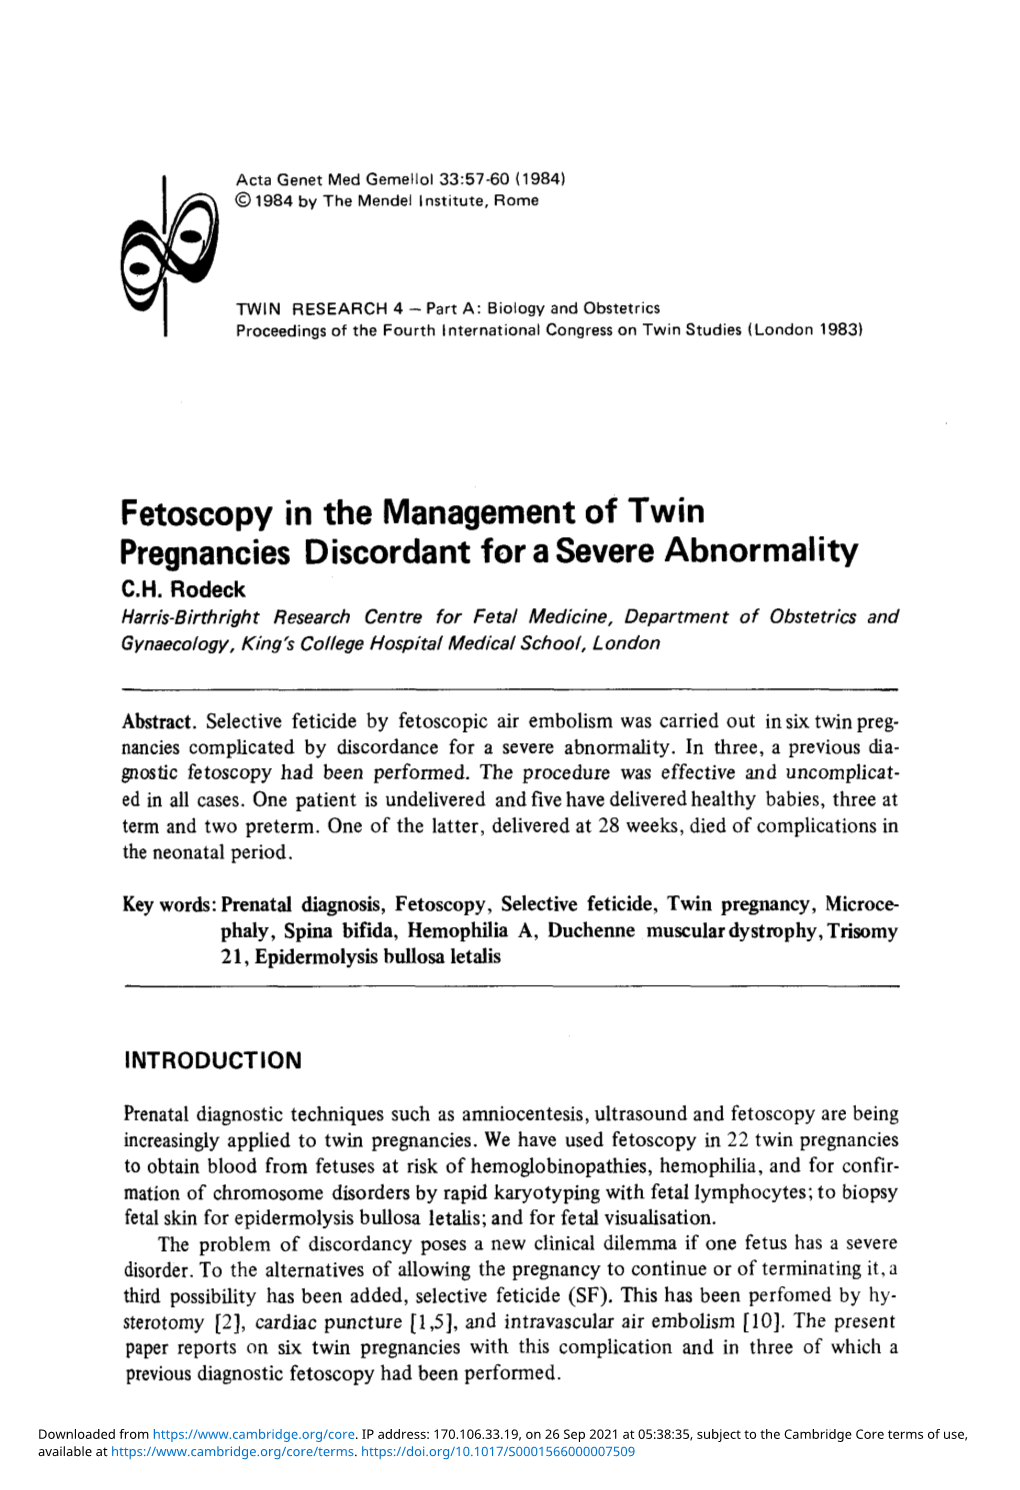 Fetoscopy in the Management of Twin Pregnancies Discordant for a Severe Abnormality C.H